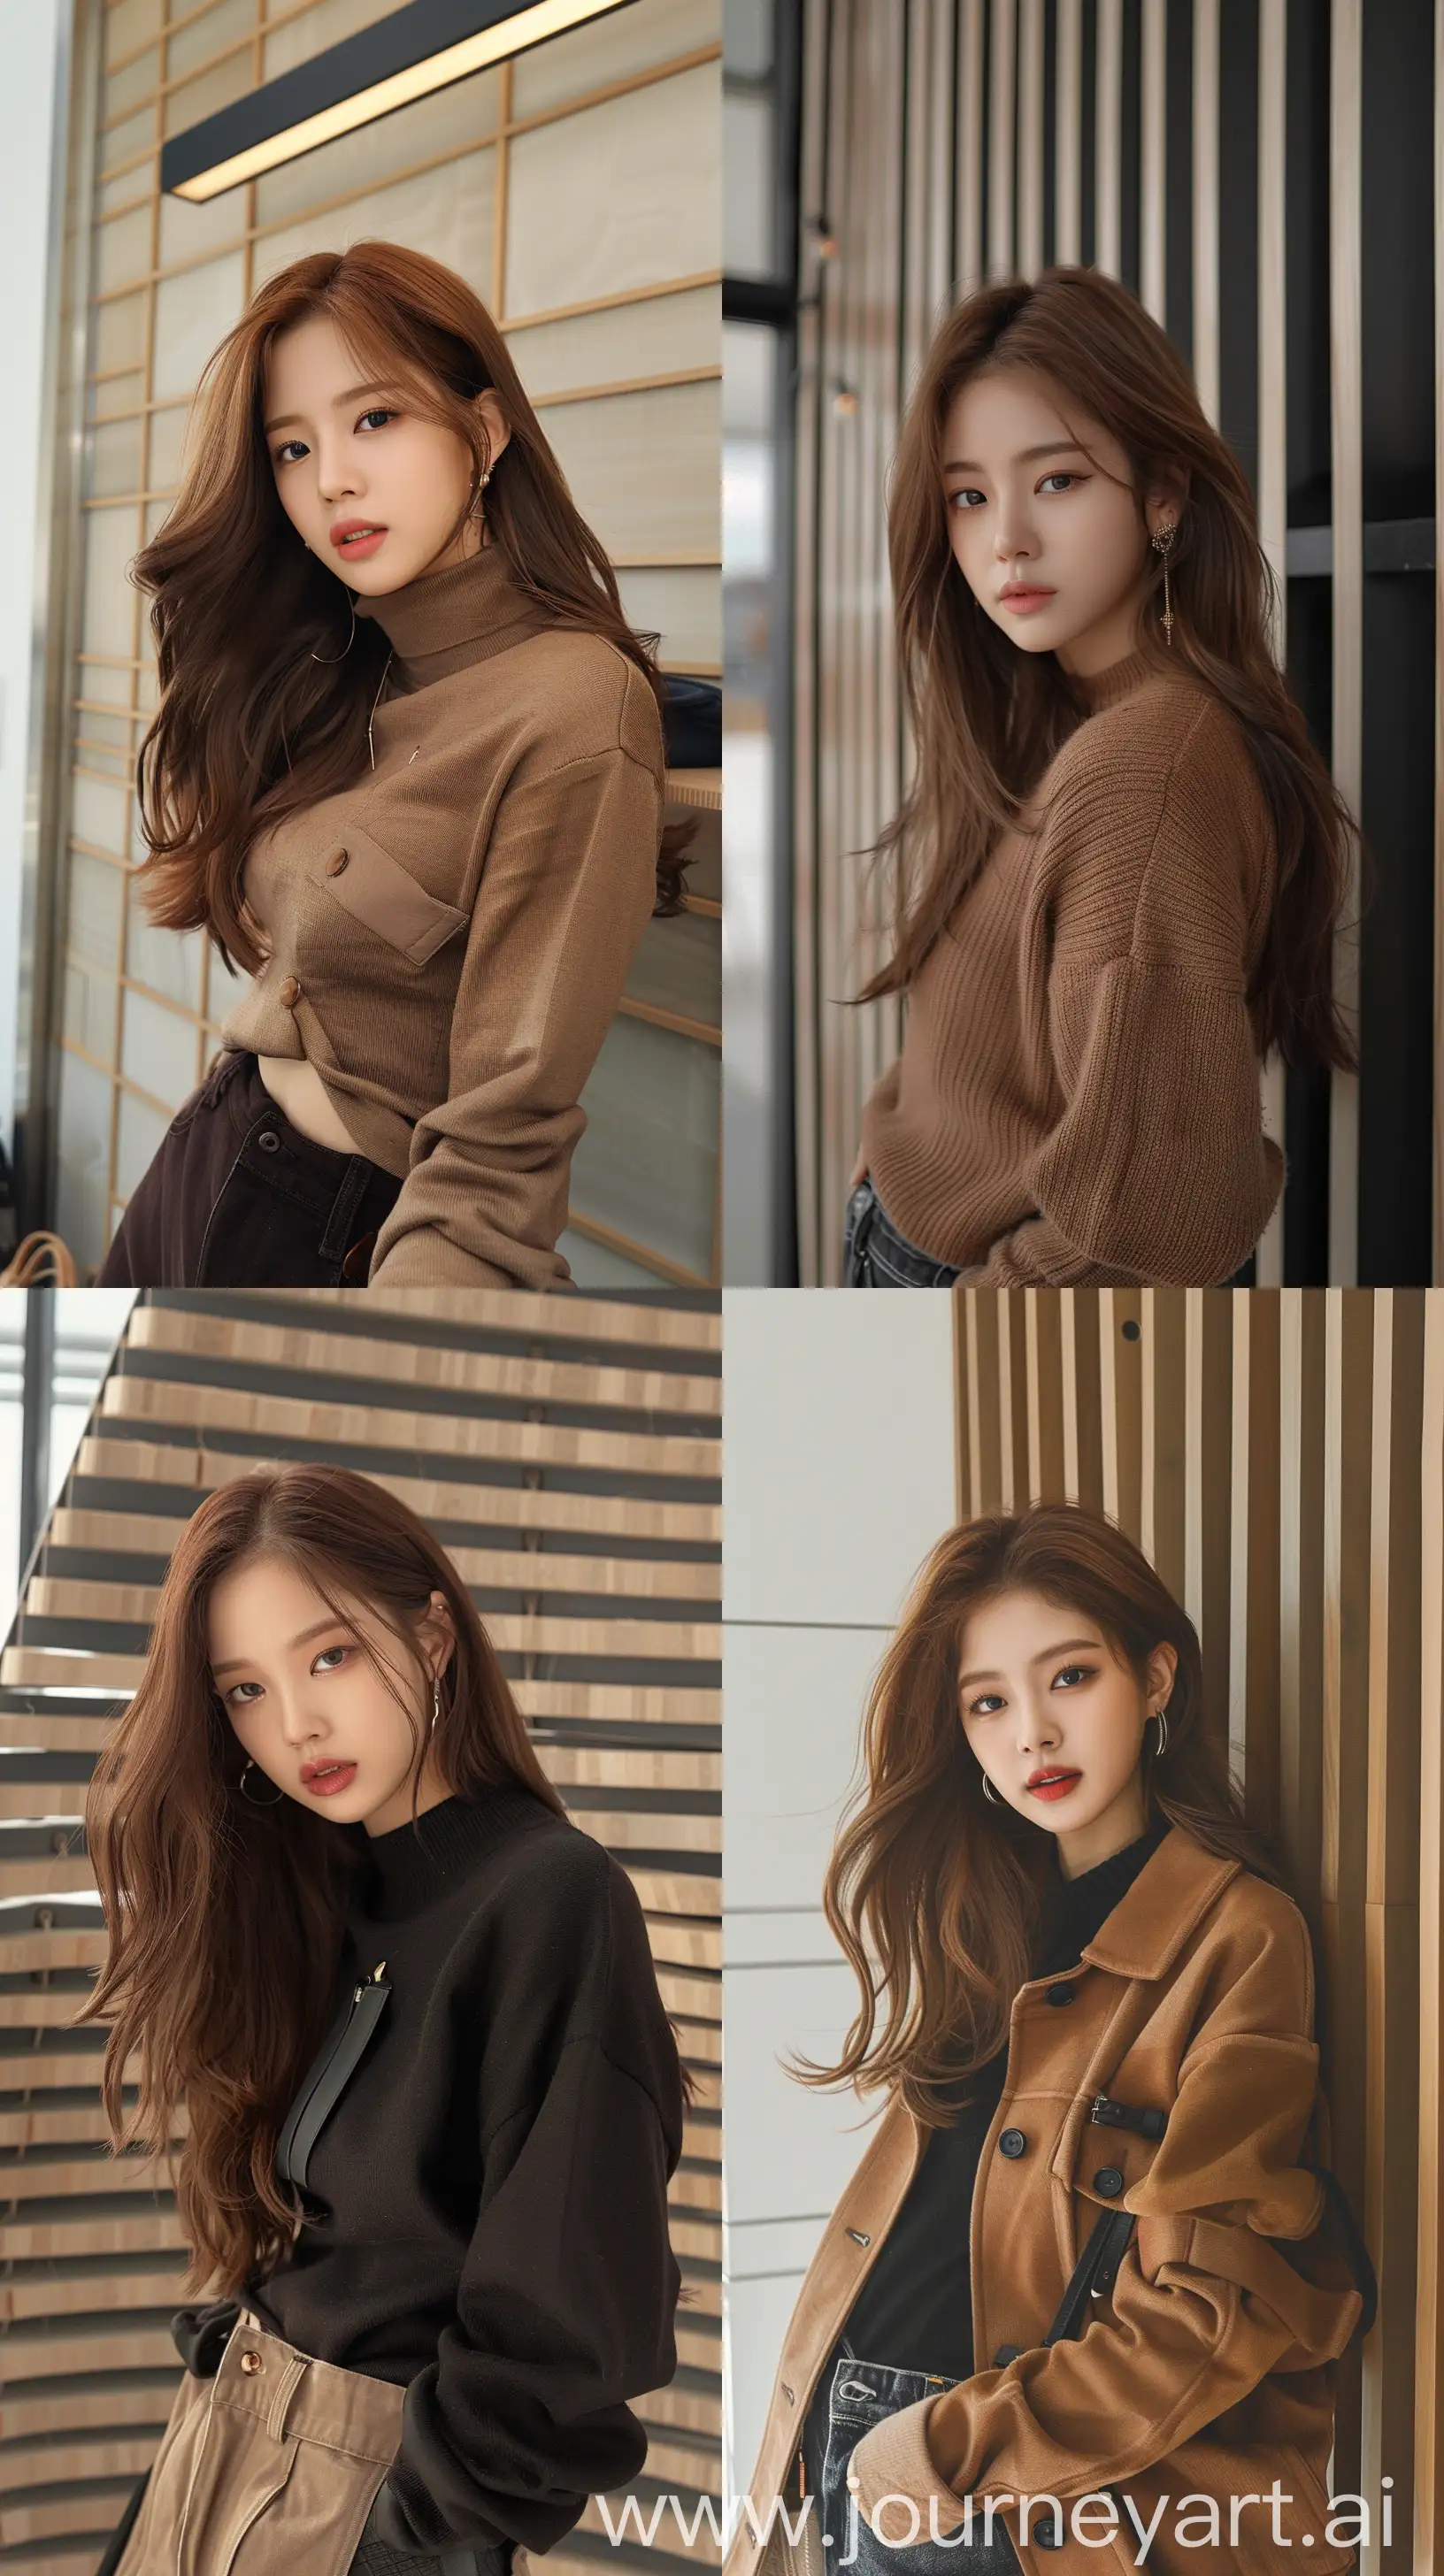 Chic-Casual-Aesthetic-Blackpinks-Jennie-in-Modern-Brownthemed-Portrait